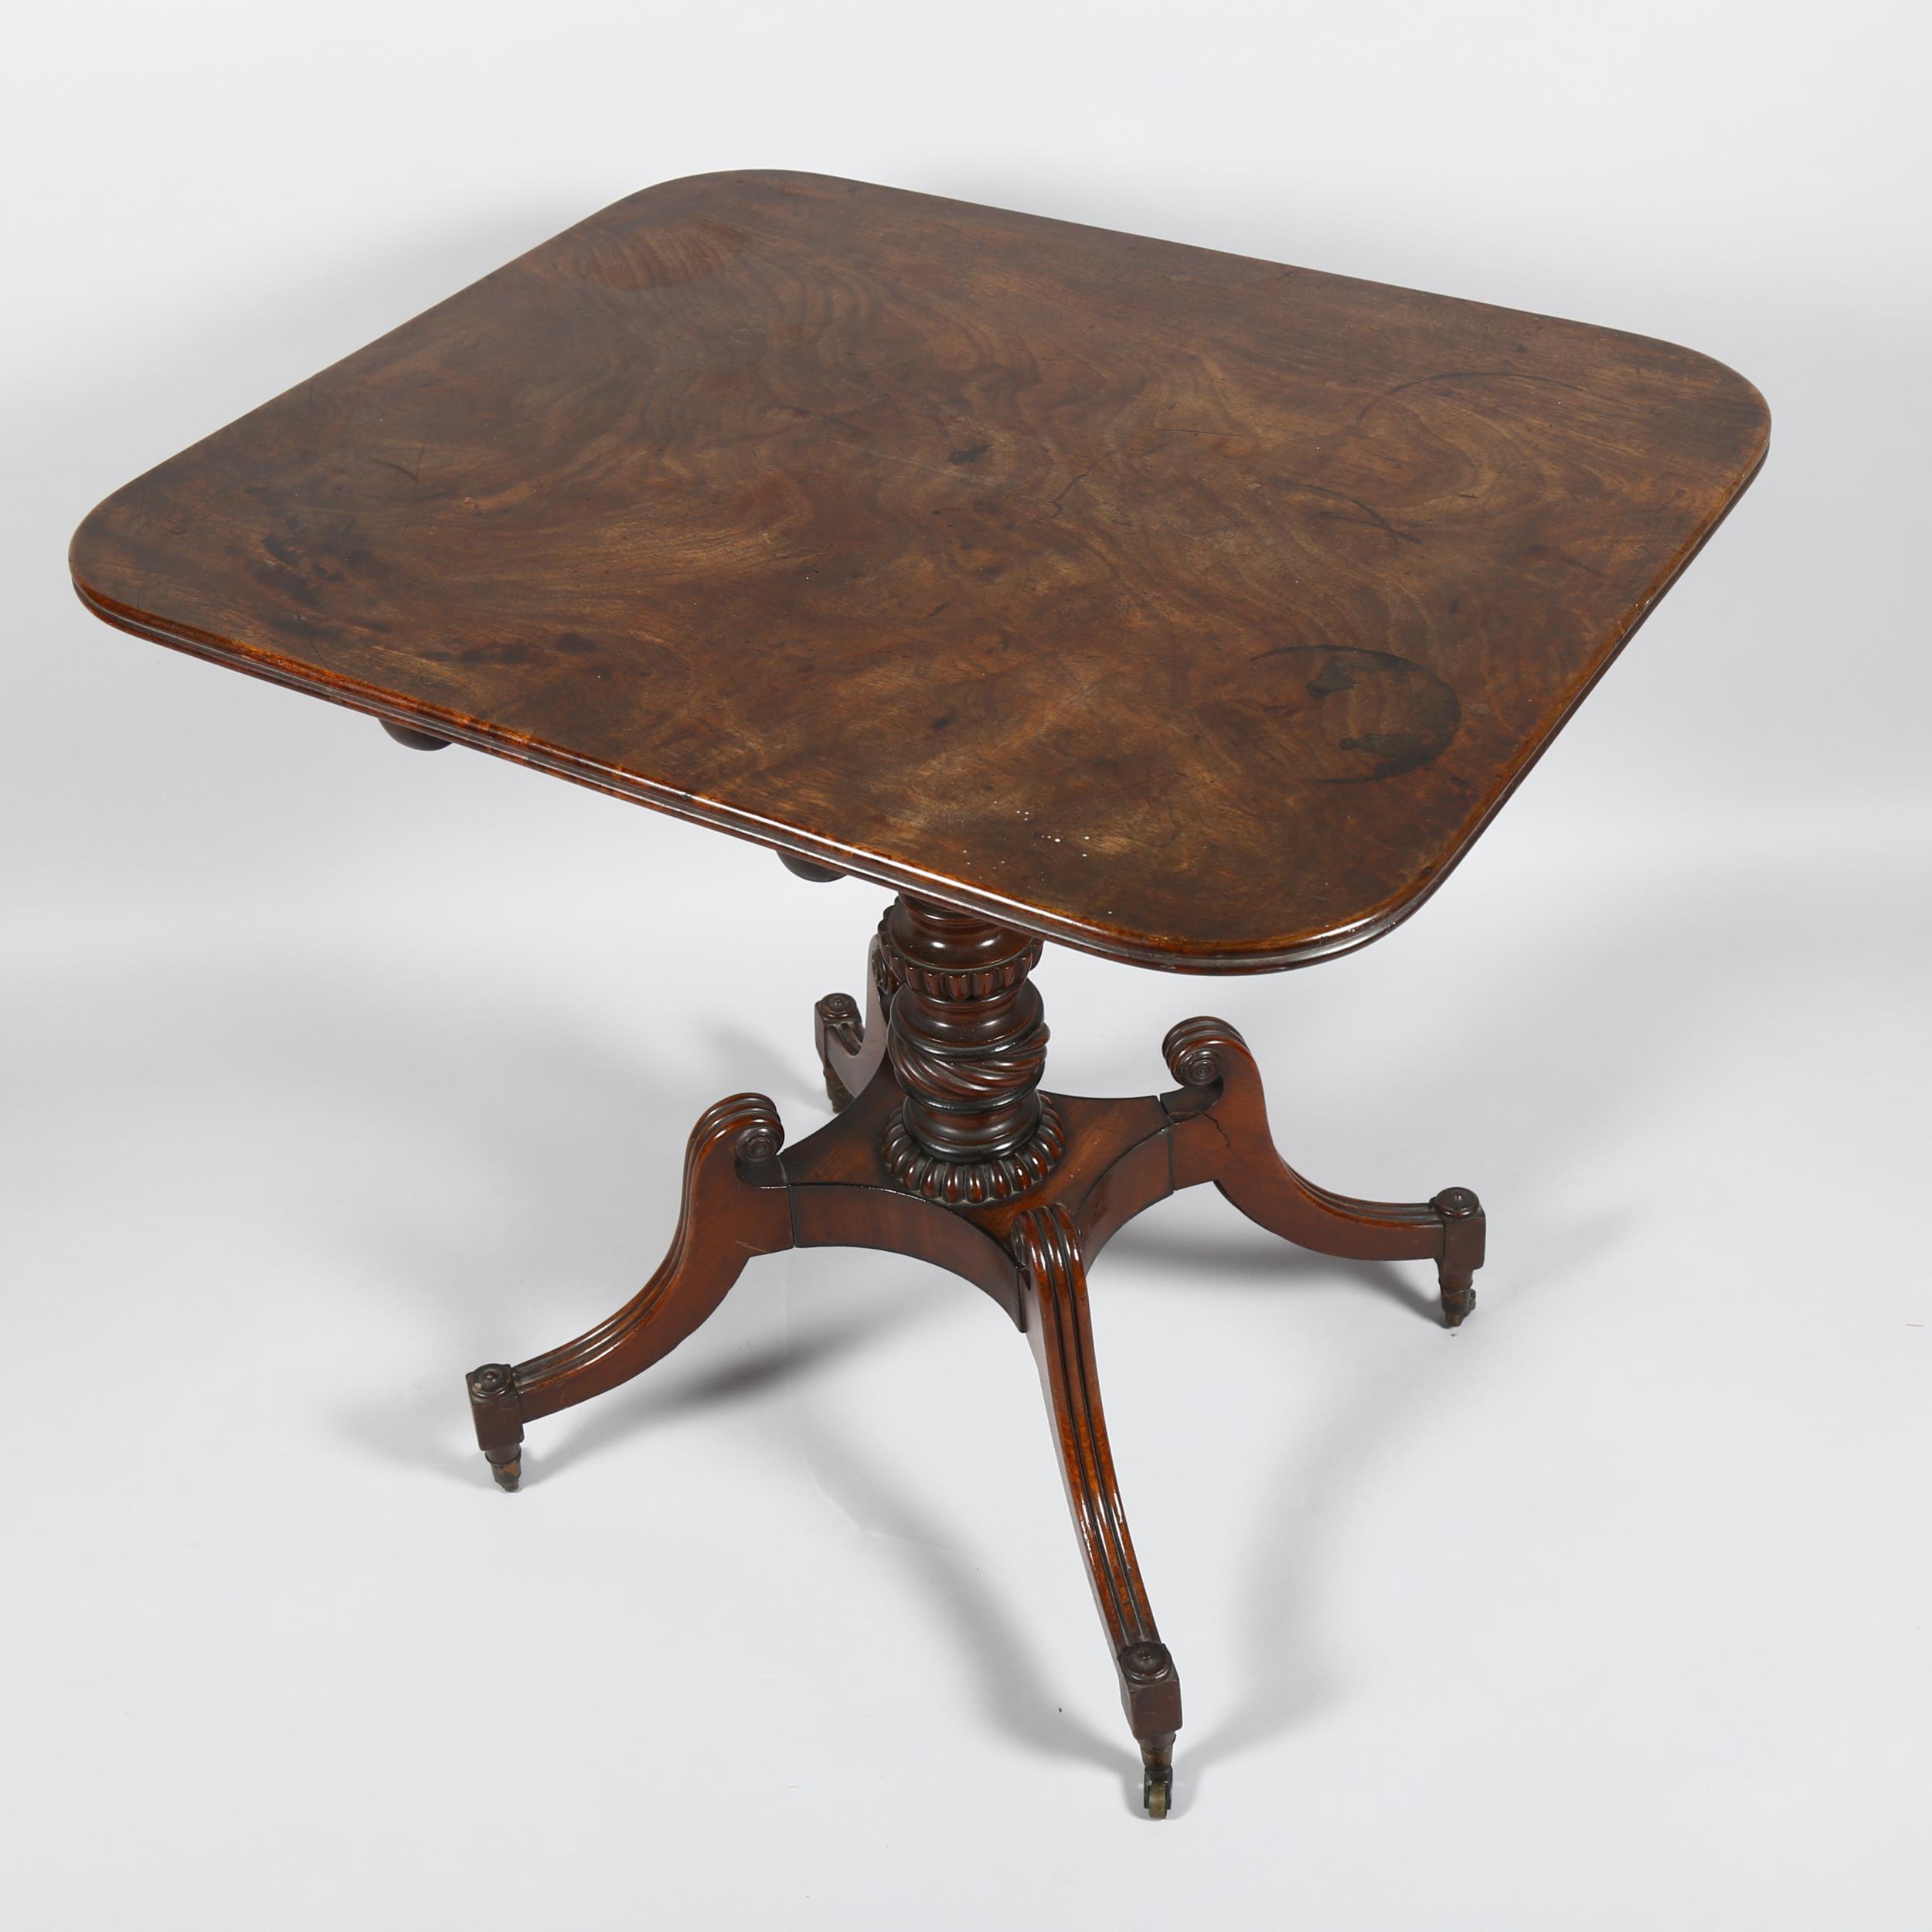 A Regency square mahogany tilt-top table, on carved quadruple base with brass casters, 74cm x 63cm - Image 5 of 5